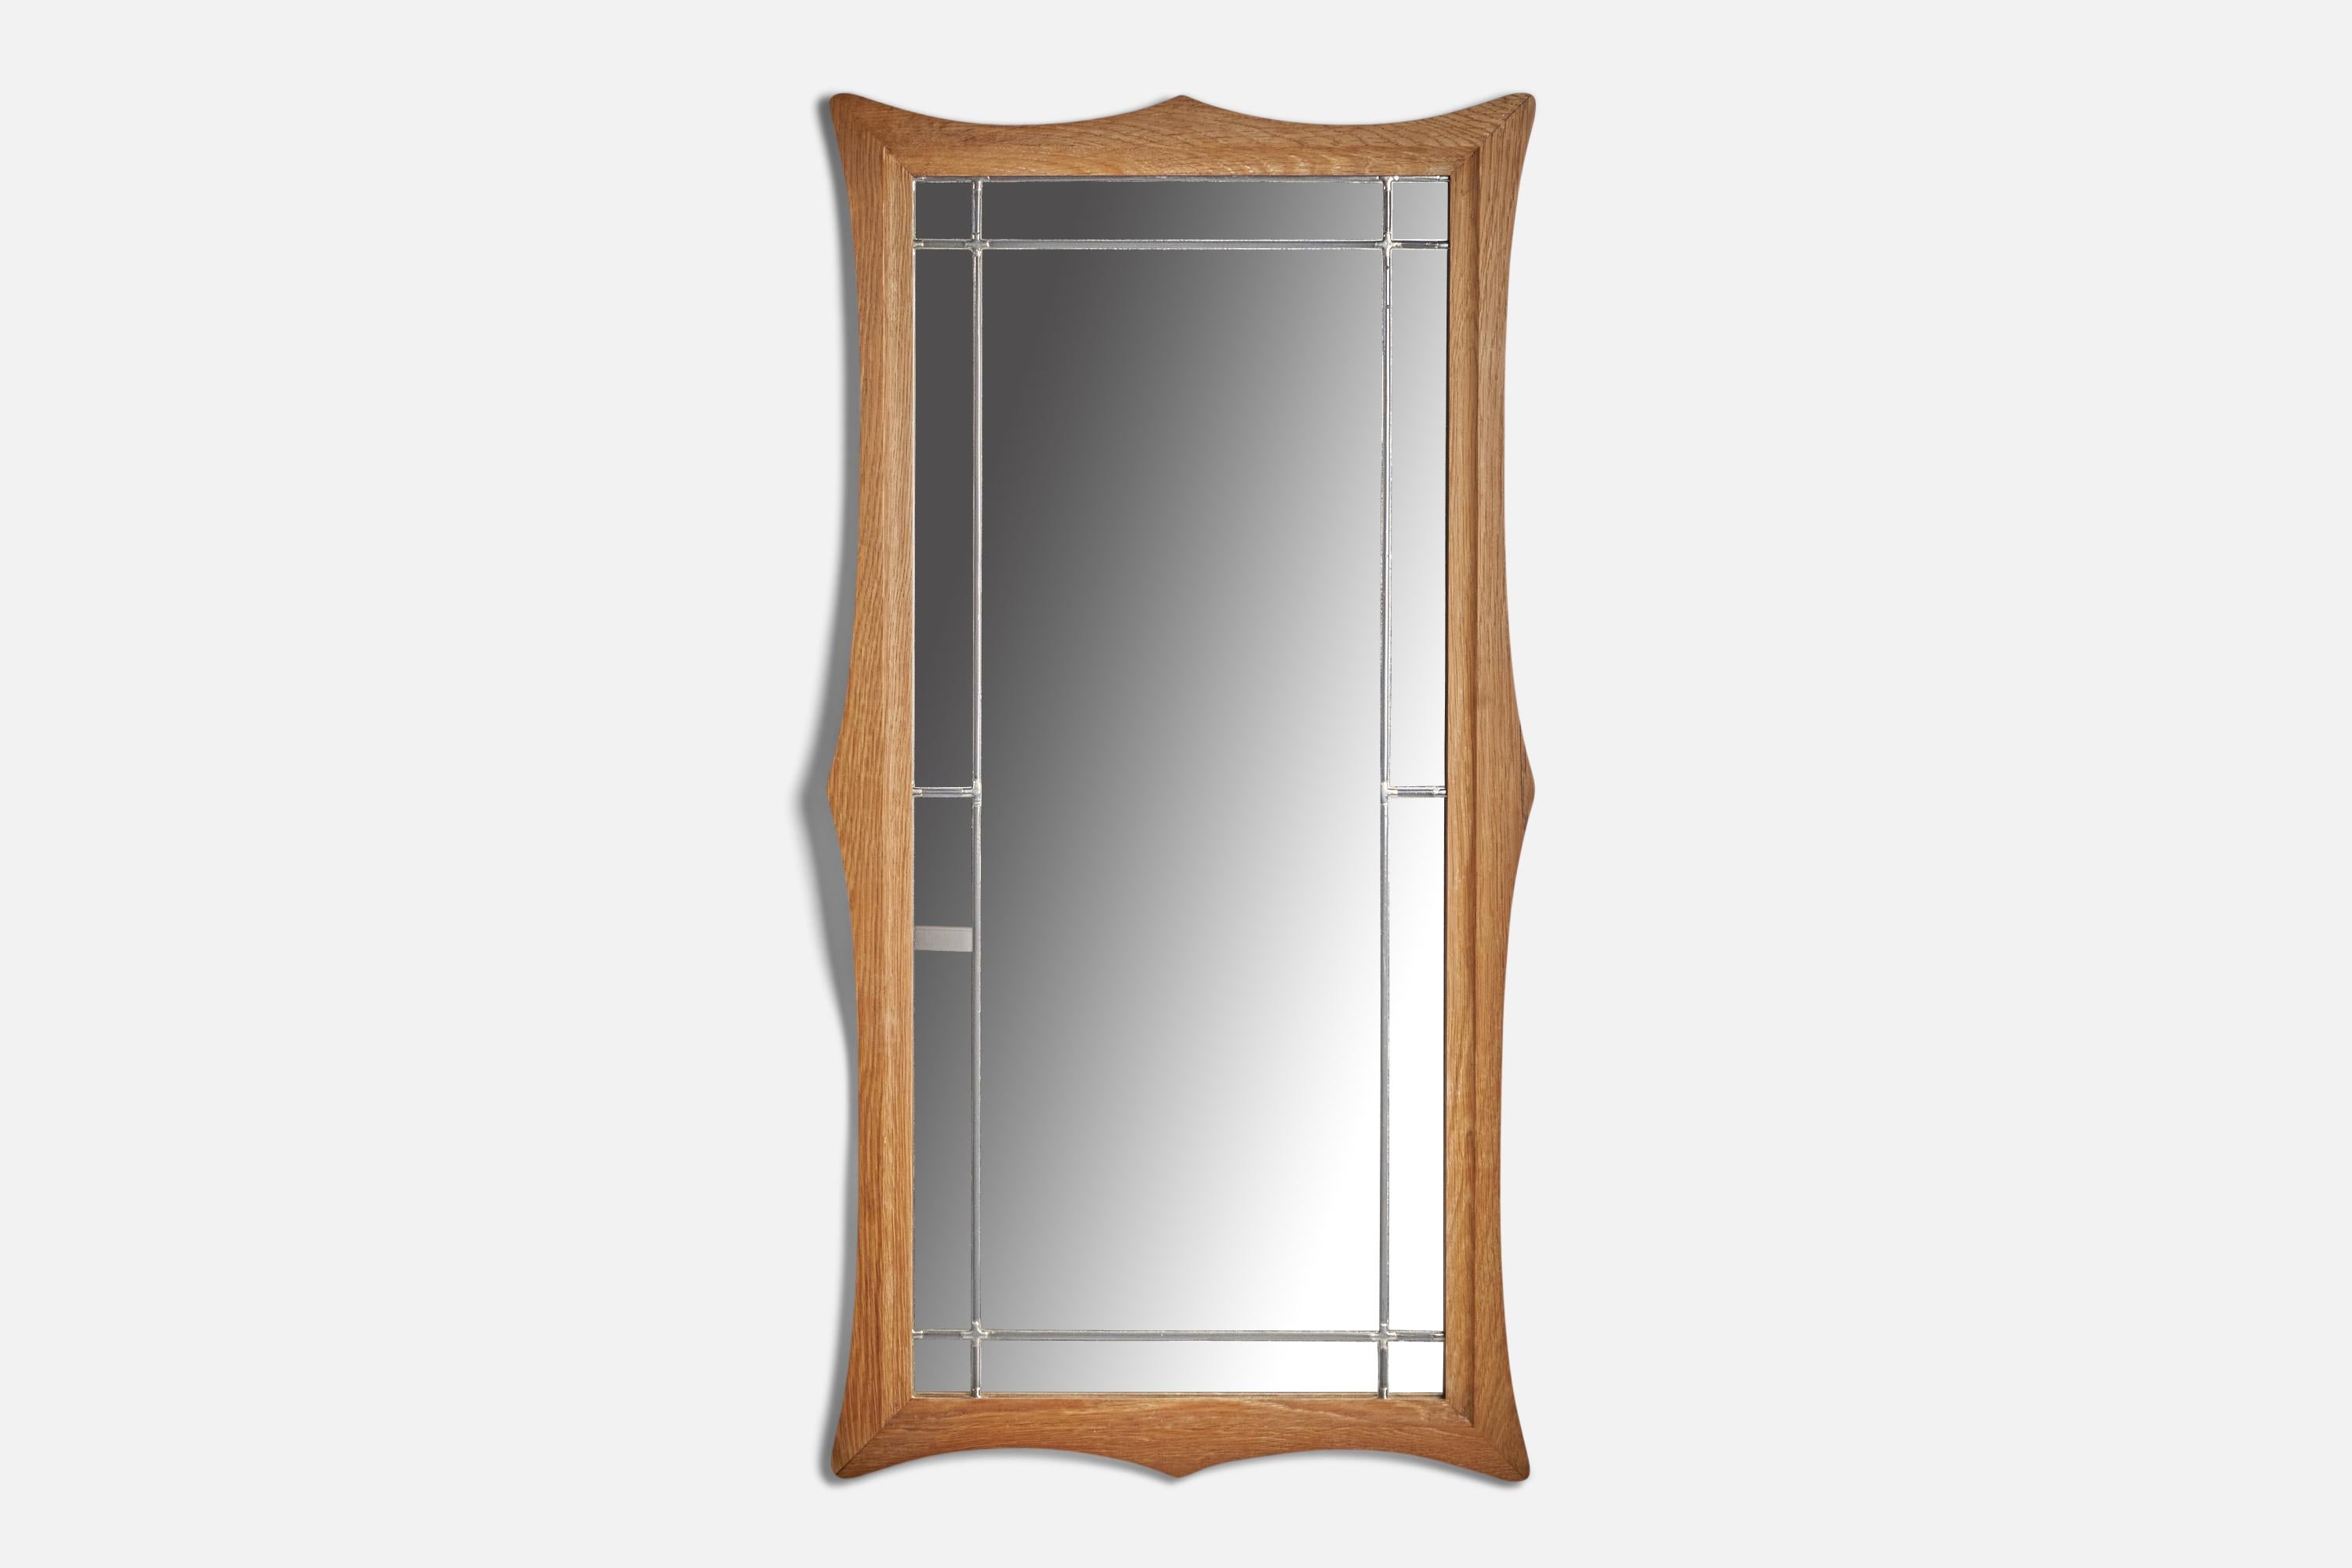 An oak and pewter wall mirror designed and produced in Denmark, c. 1960s.